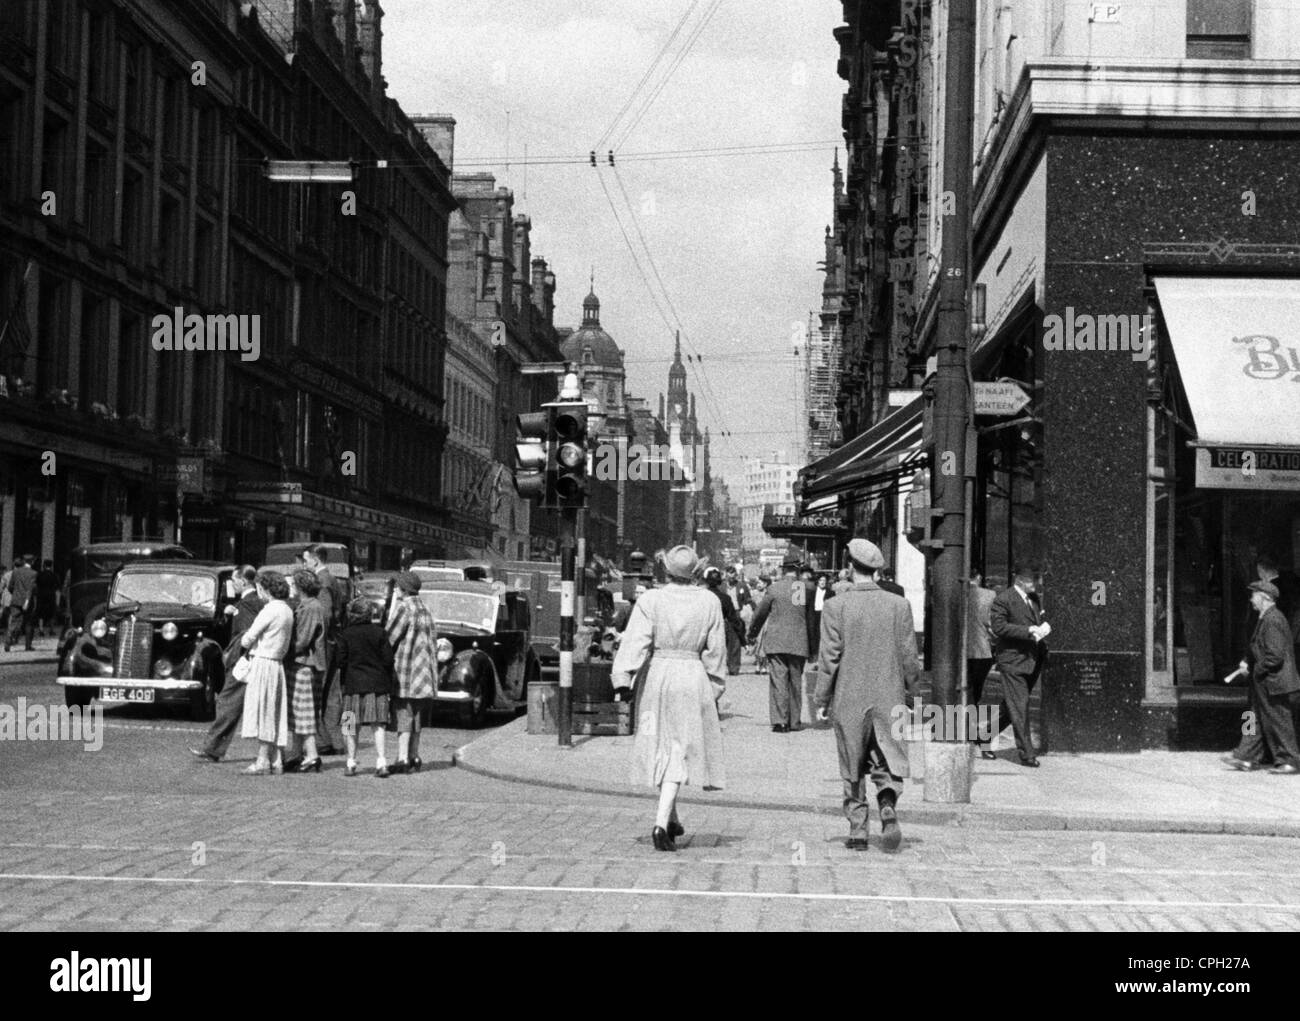 geography / travel, Great Britain, Glasgow, street scenes, Buchanan Street, circa 1950 40s, 1940s, 50s, 1950s, 20th century, historic, historical, Western Europe, Scotland, car, cars, transport, transportation, street scene, street scenes, pedestrian, pedestrians, passer-by, passerby, passers-by, inner city, midtown, city centre, town centre, urban core, people, Additional-Rights-Clearences-Not Available Stock Photo